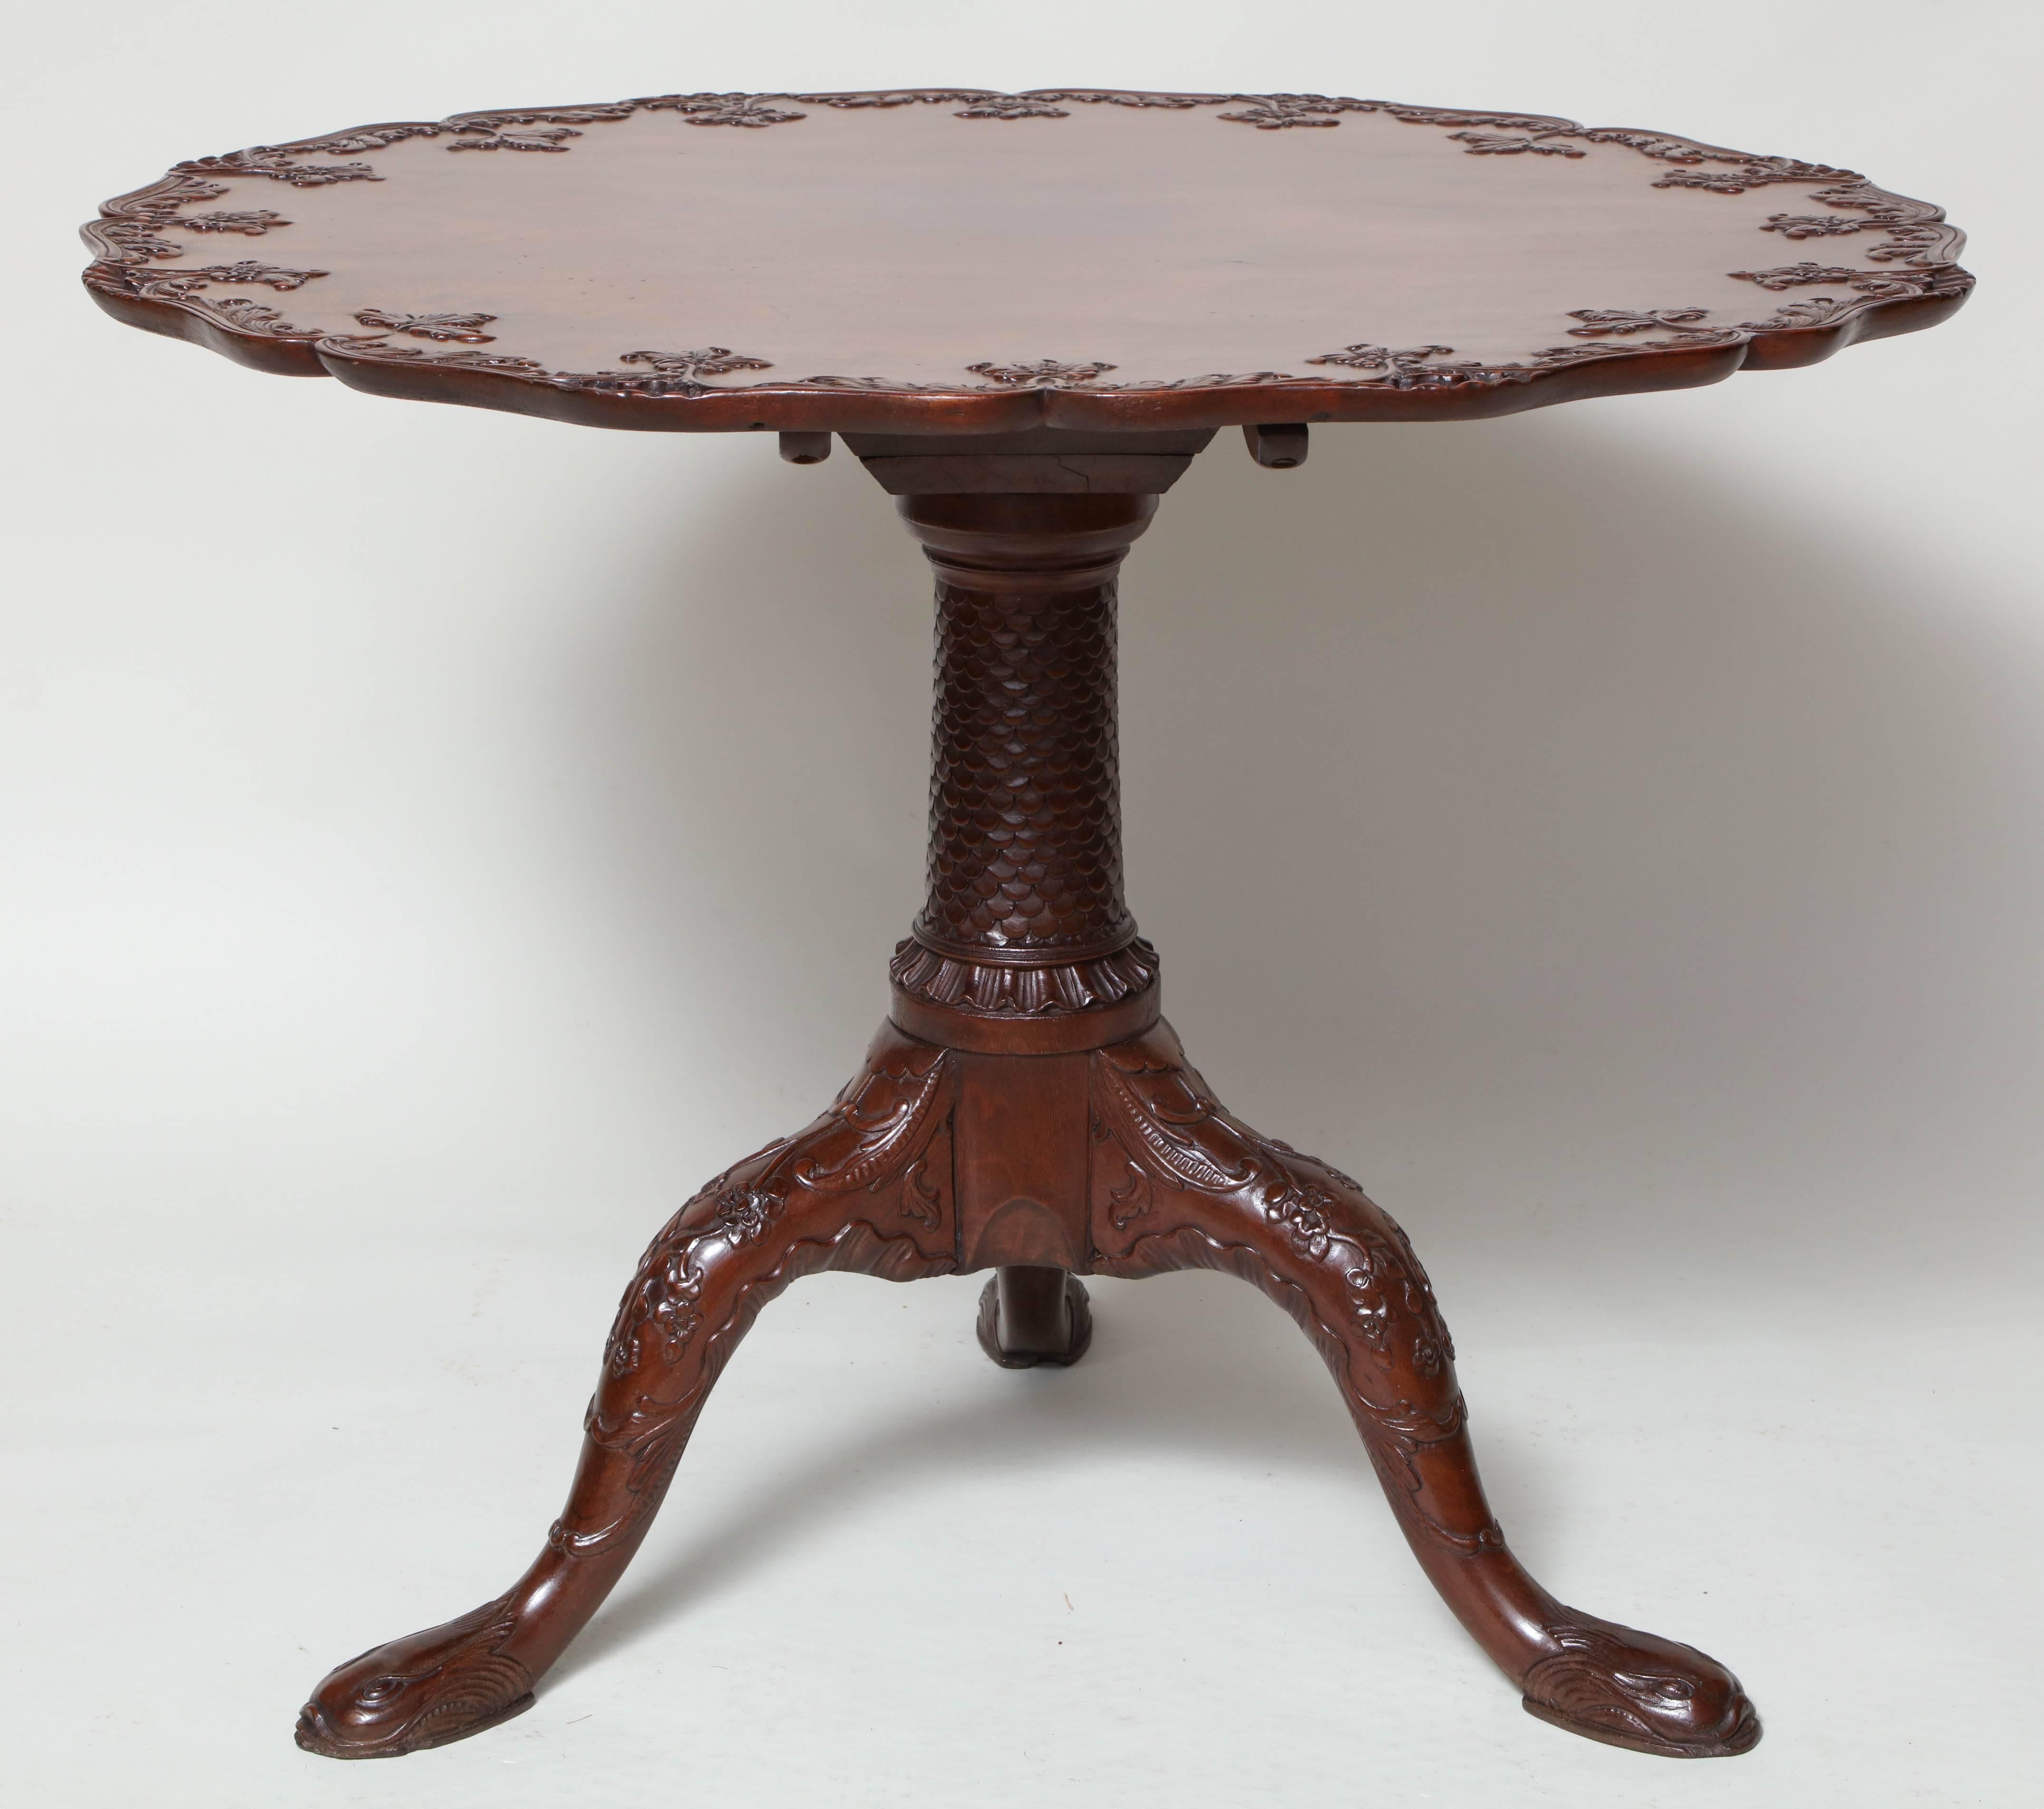 Very fine 18th century padouk tilt-top table with foliate carved scalloped single board top over scale carved shaft with pagoda base over three cabriole legs with foliage and vine carving ending in dolphin carved feet.